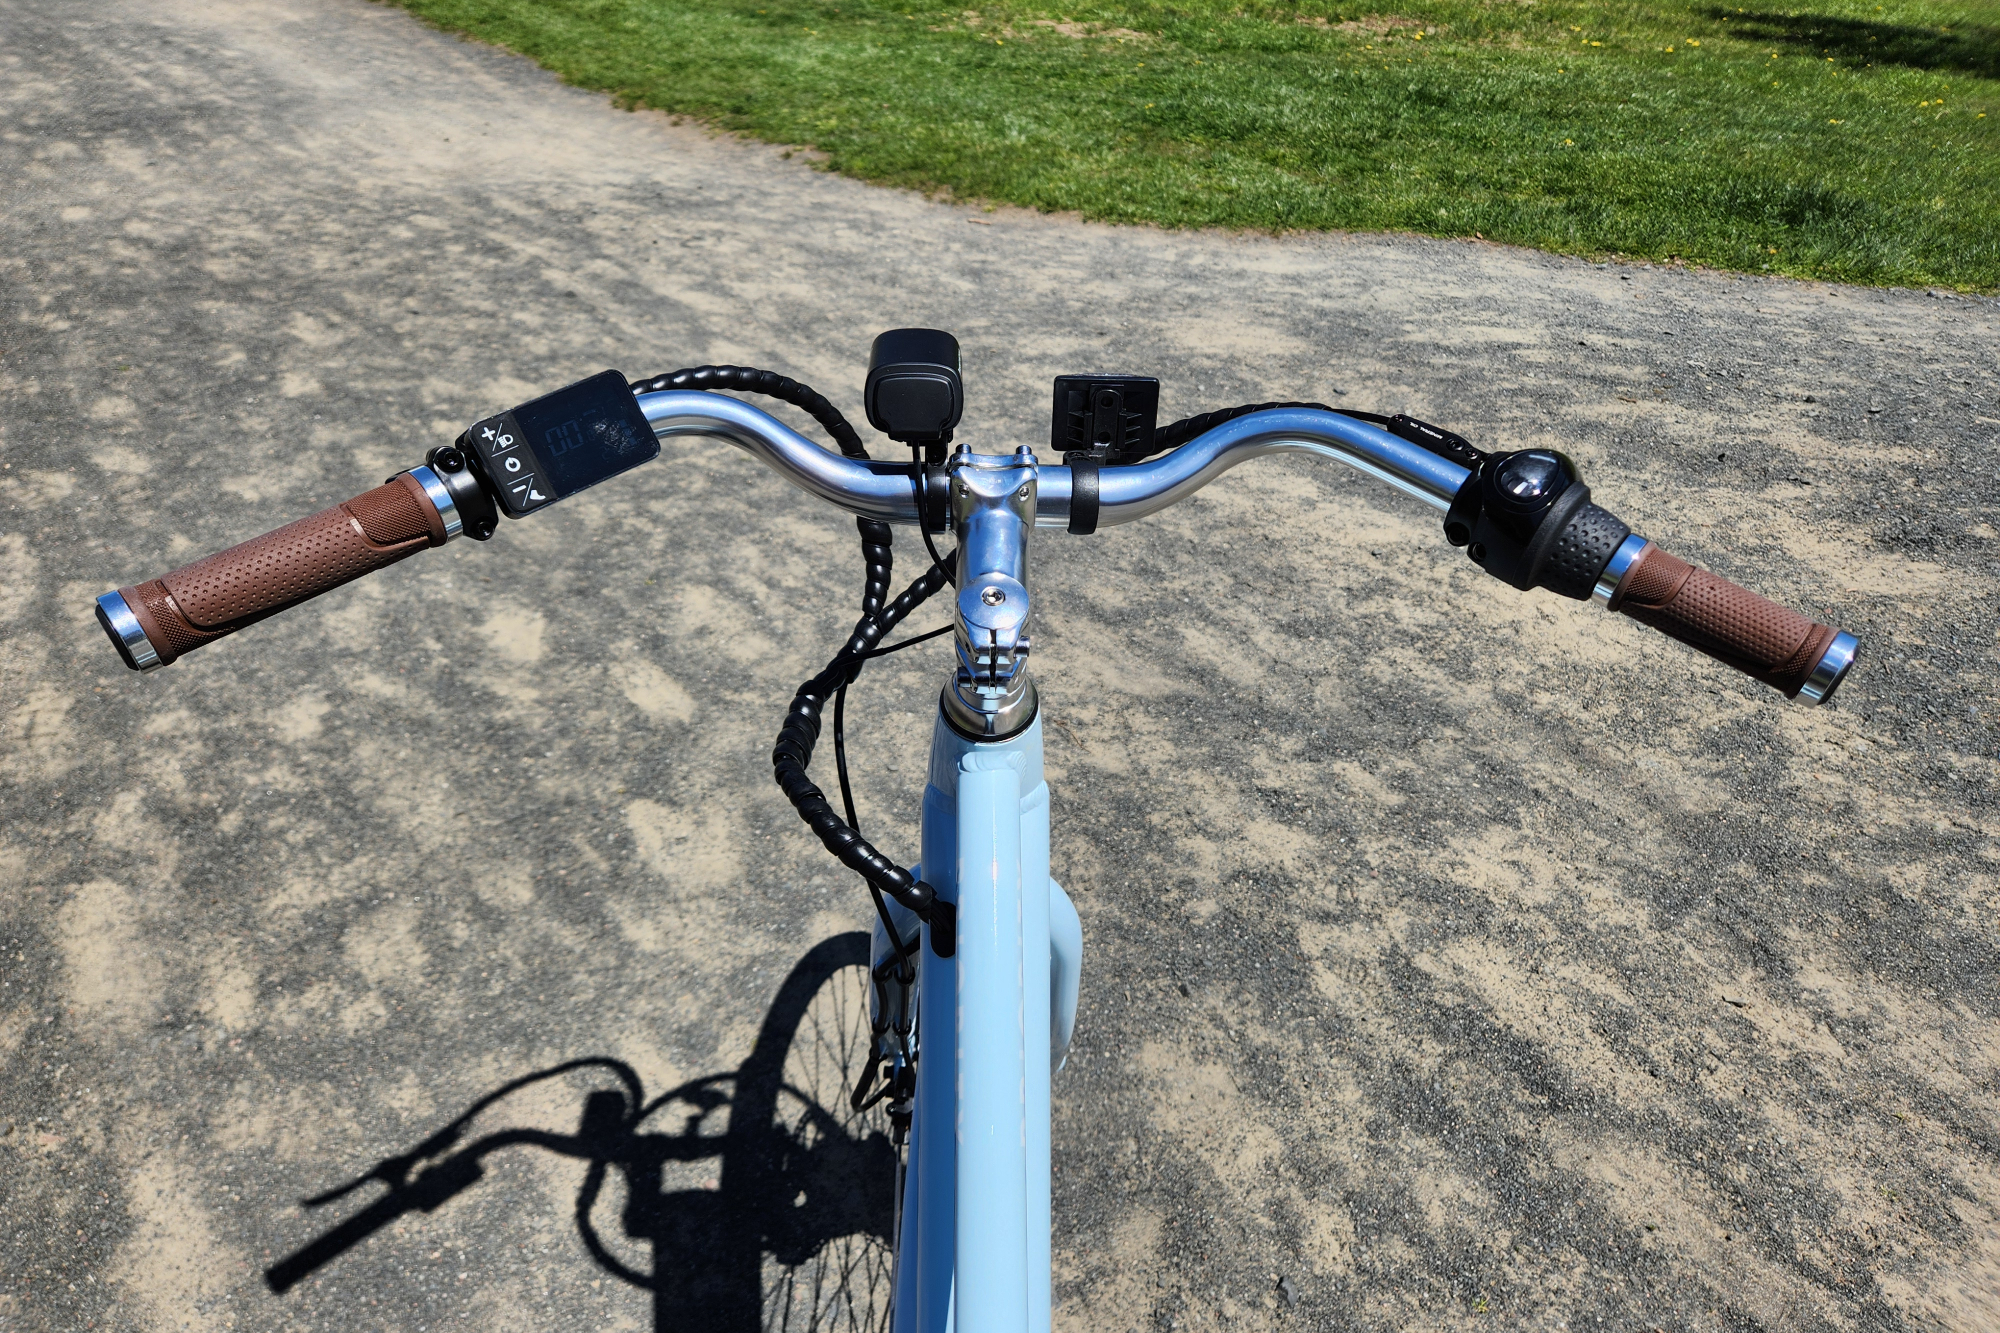 Priority Bicycles e-Classic Plus e-bike backswept handlebars with display control on the left, display and headlight near the st